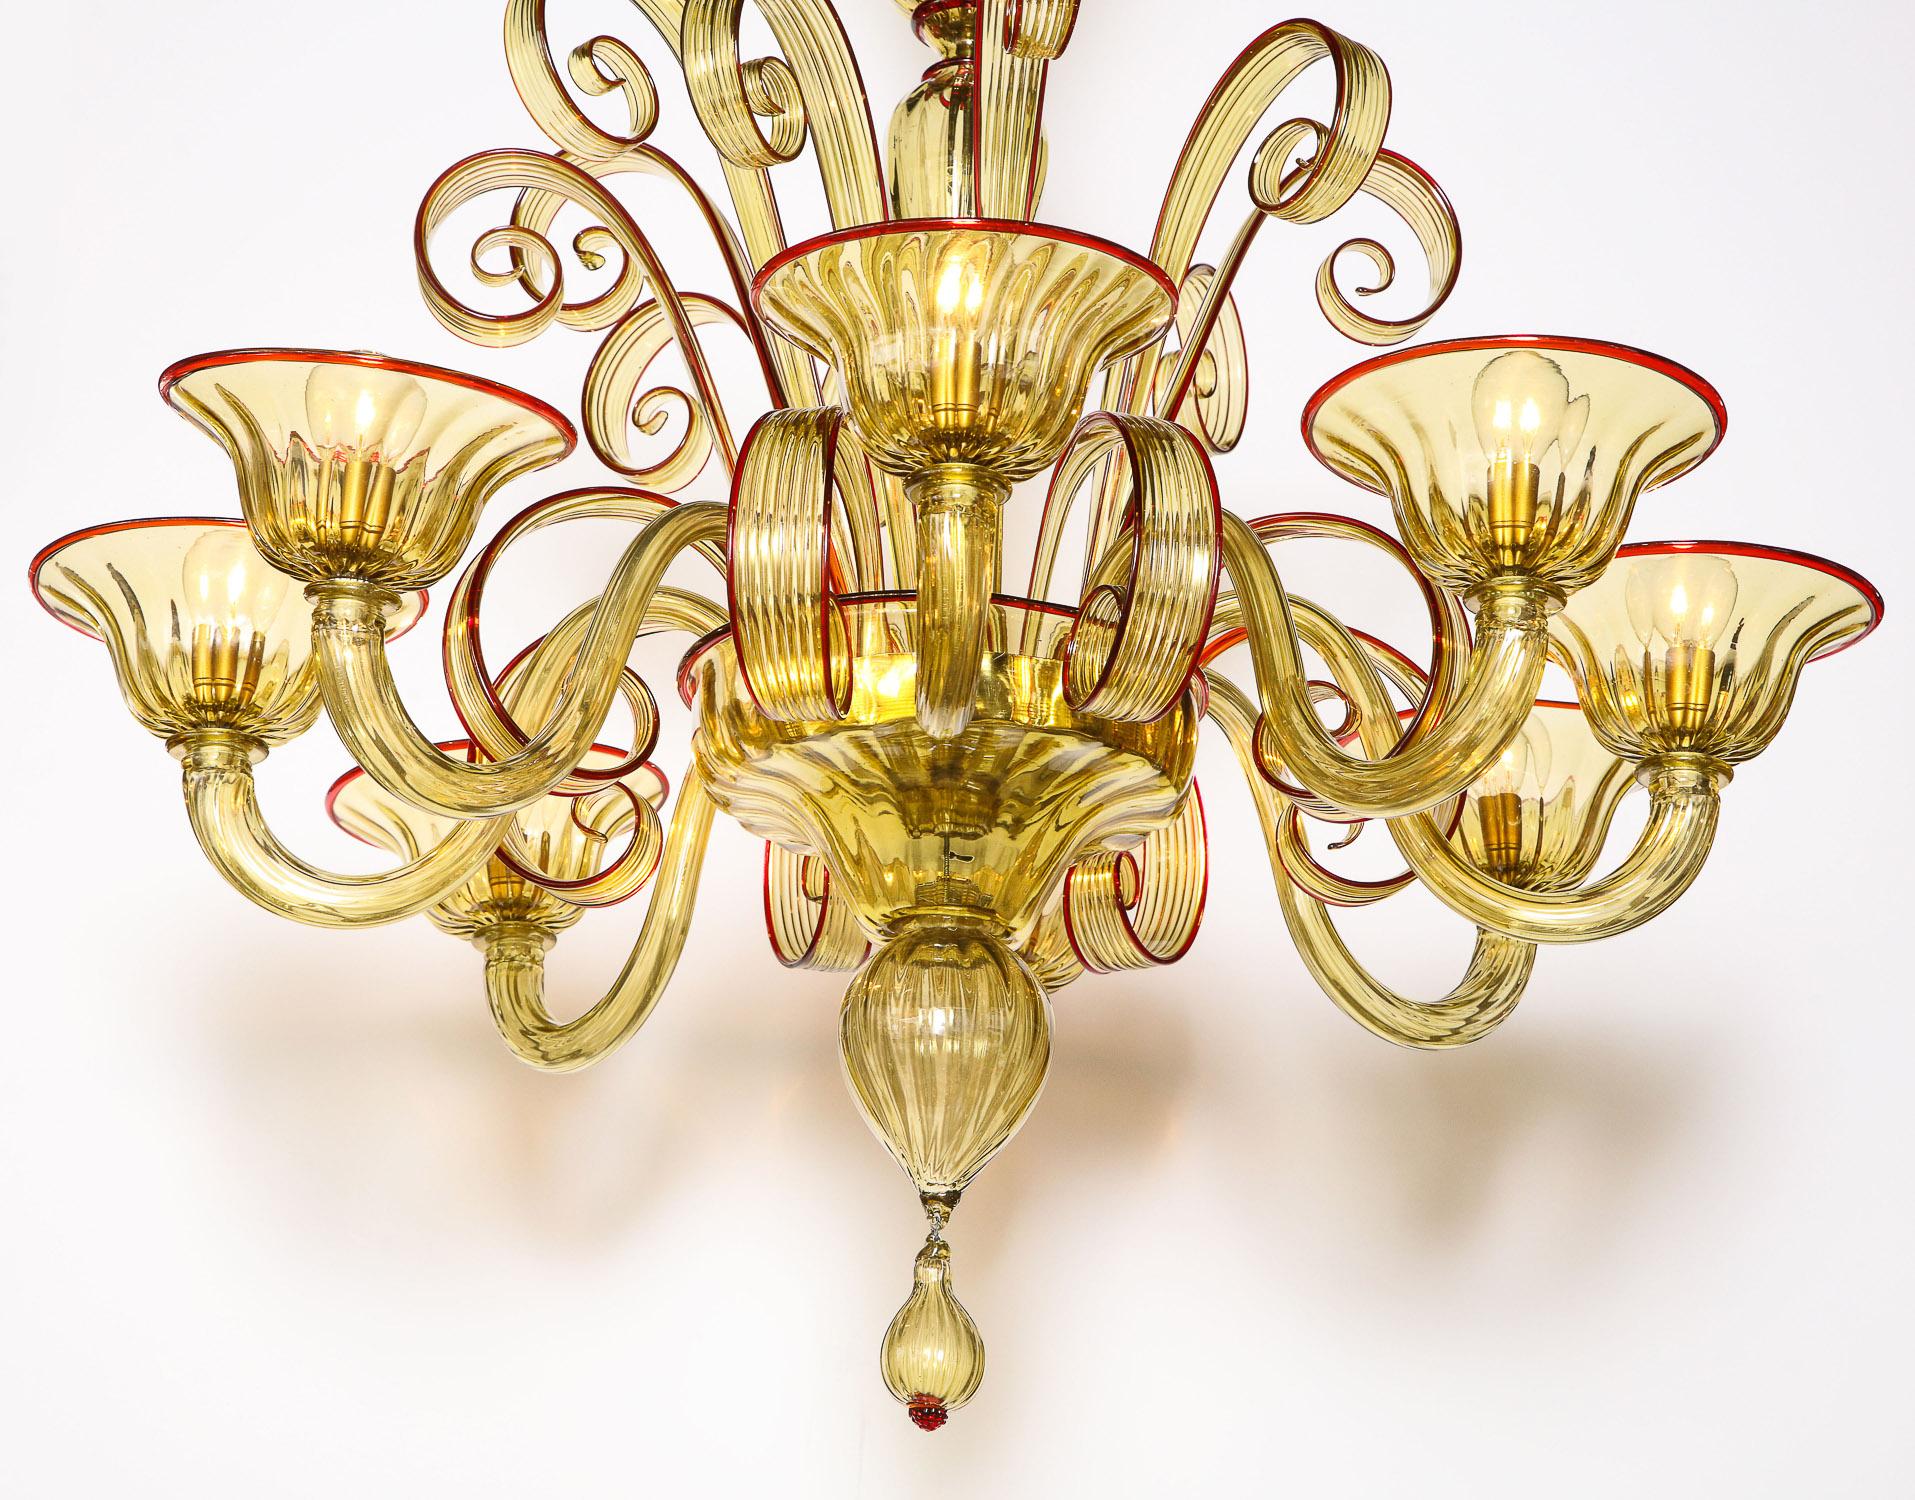 Venetian Glass Chandelier, Amber Color/Red, Contemporary, 8 Arms, Murano, Italy For Sale 4